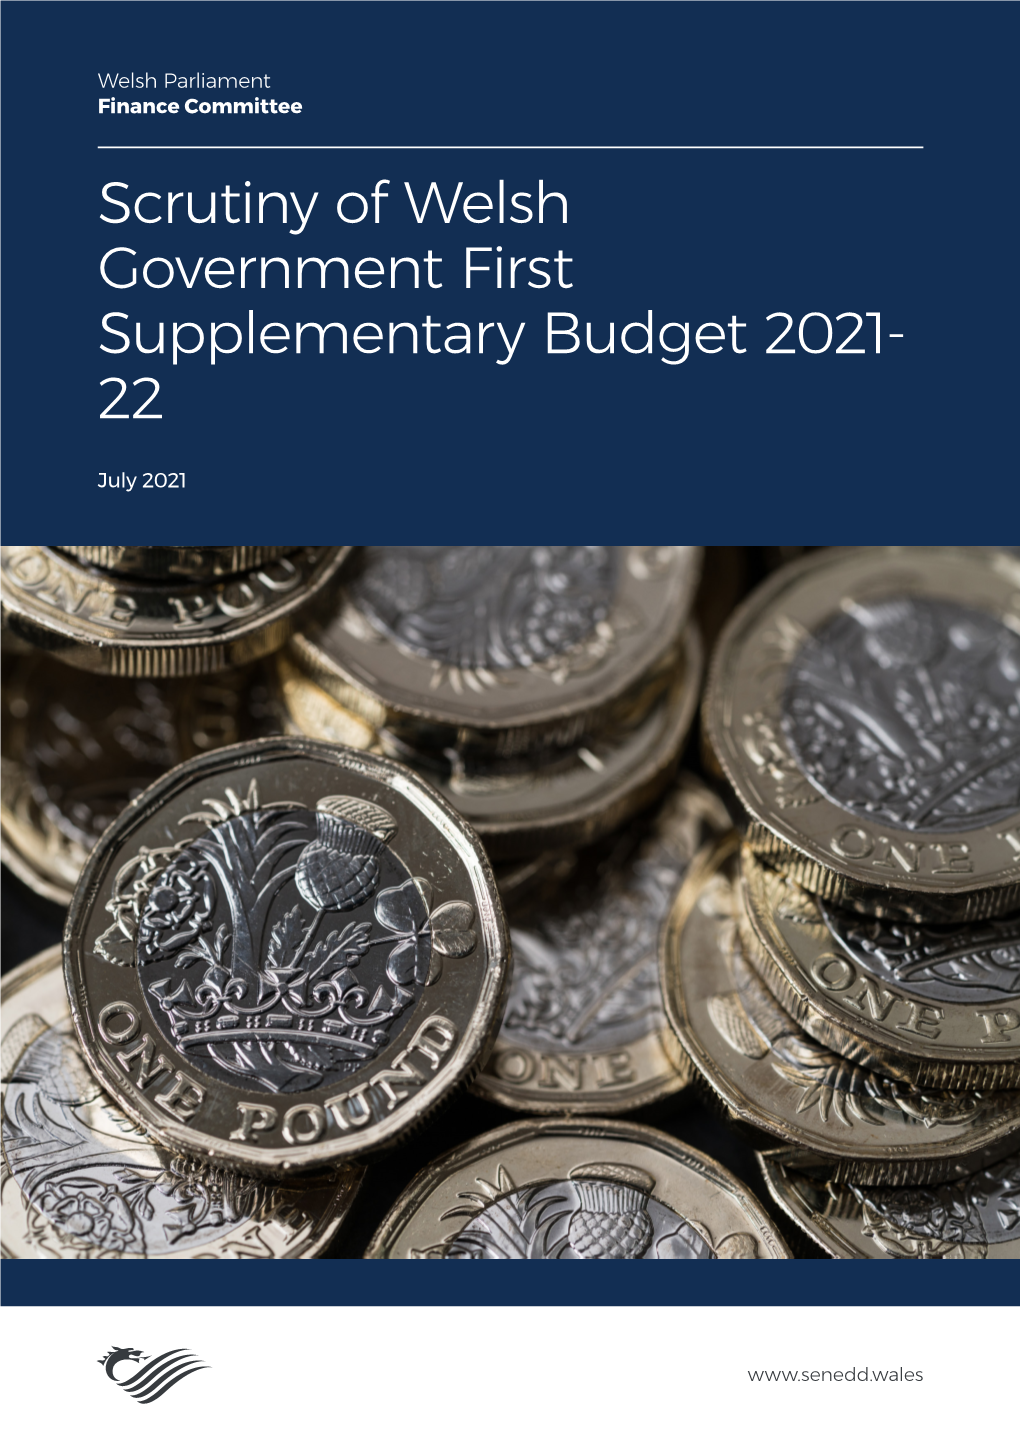 Scrutiny of Welsh Government First Supplementary Budget 2021-22